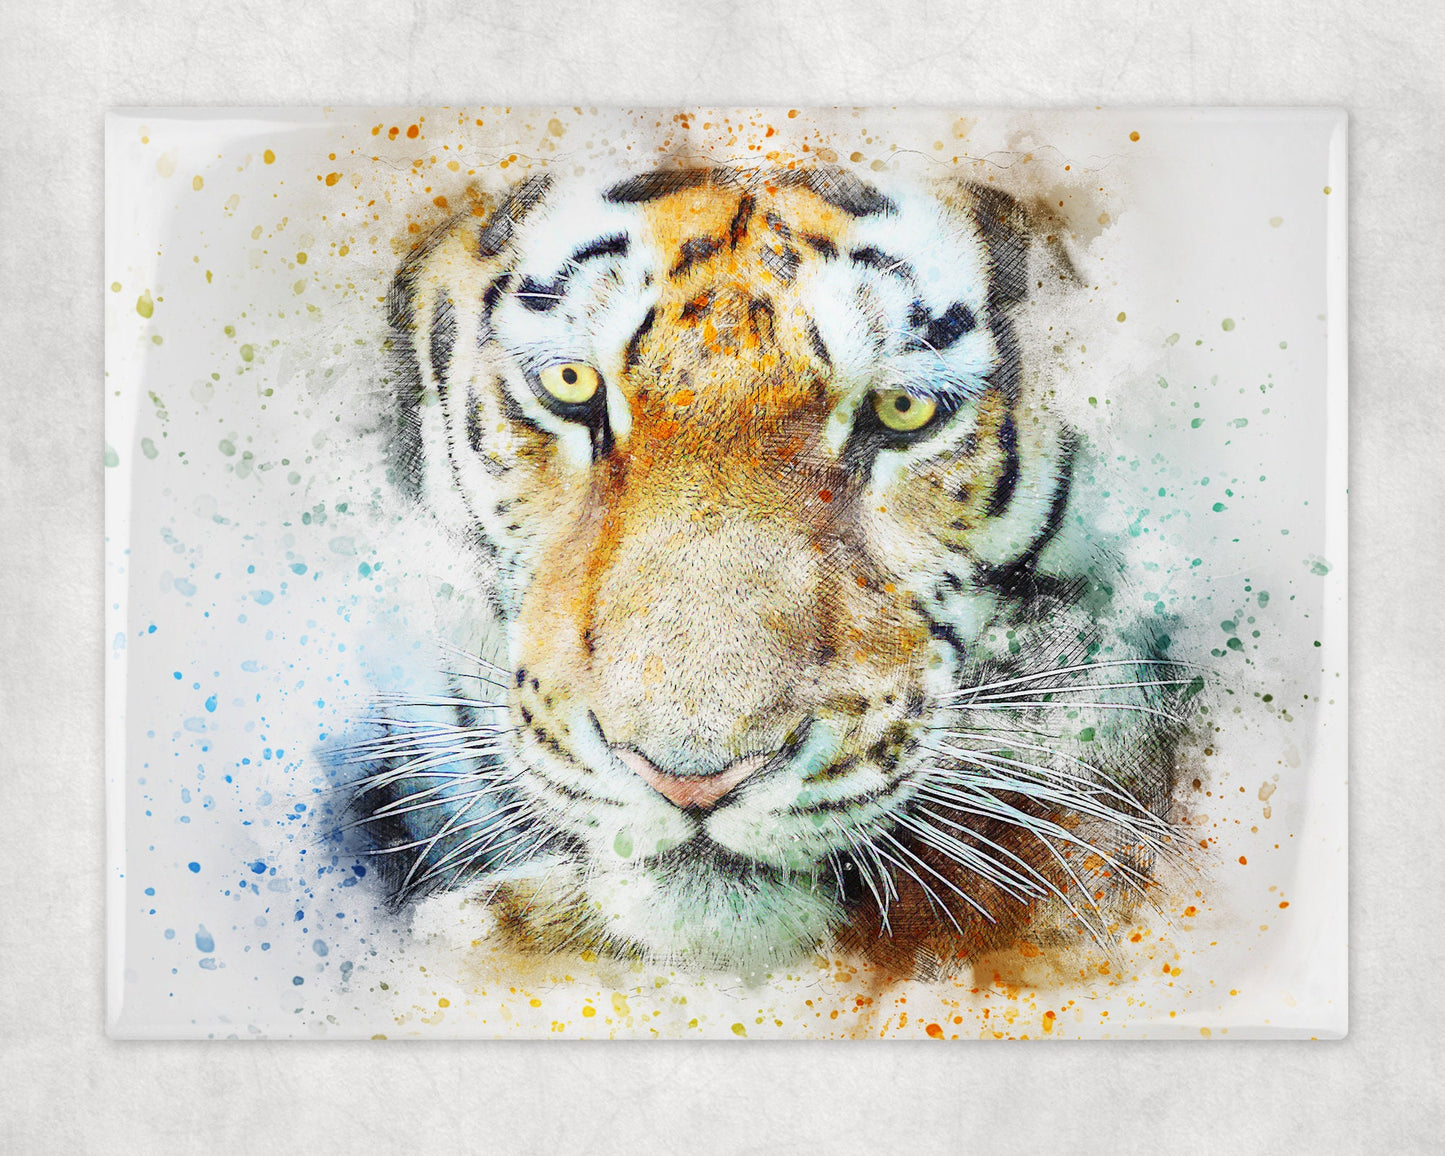 Watercolor Tiger Art Decorative Ceramic Tile with Optional Easel Back - 6x8 Inches